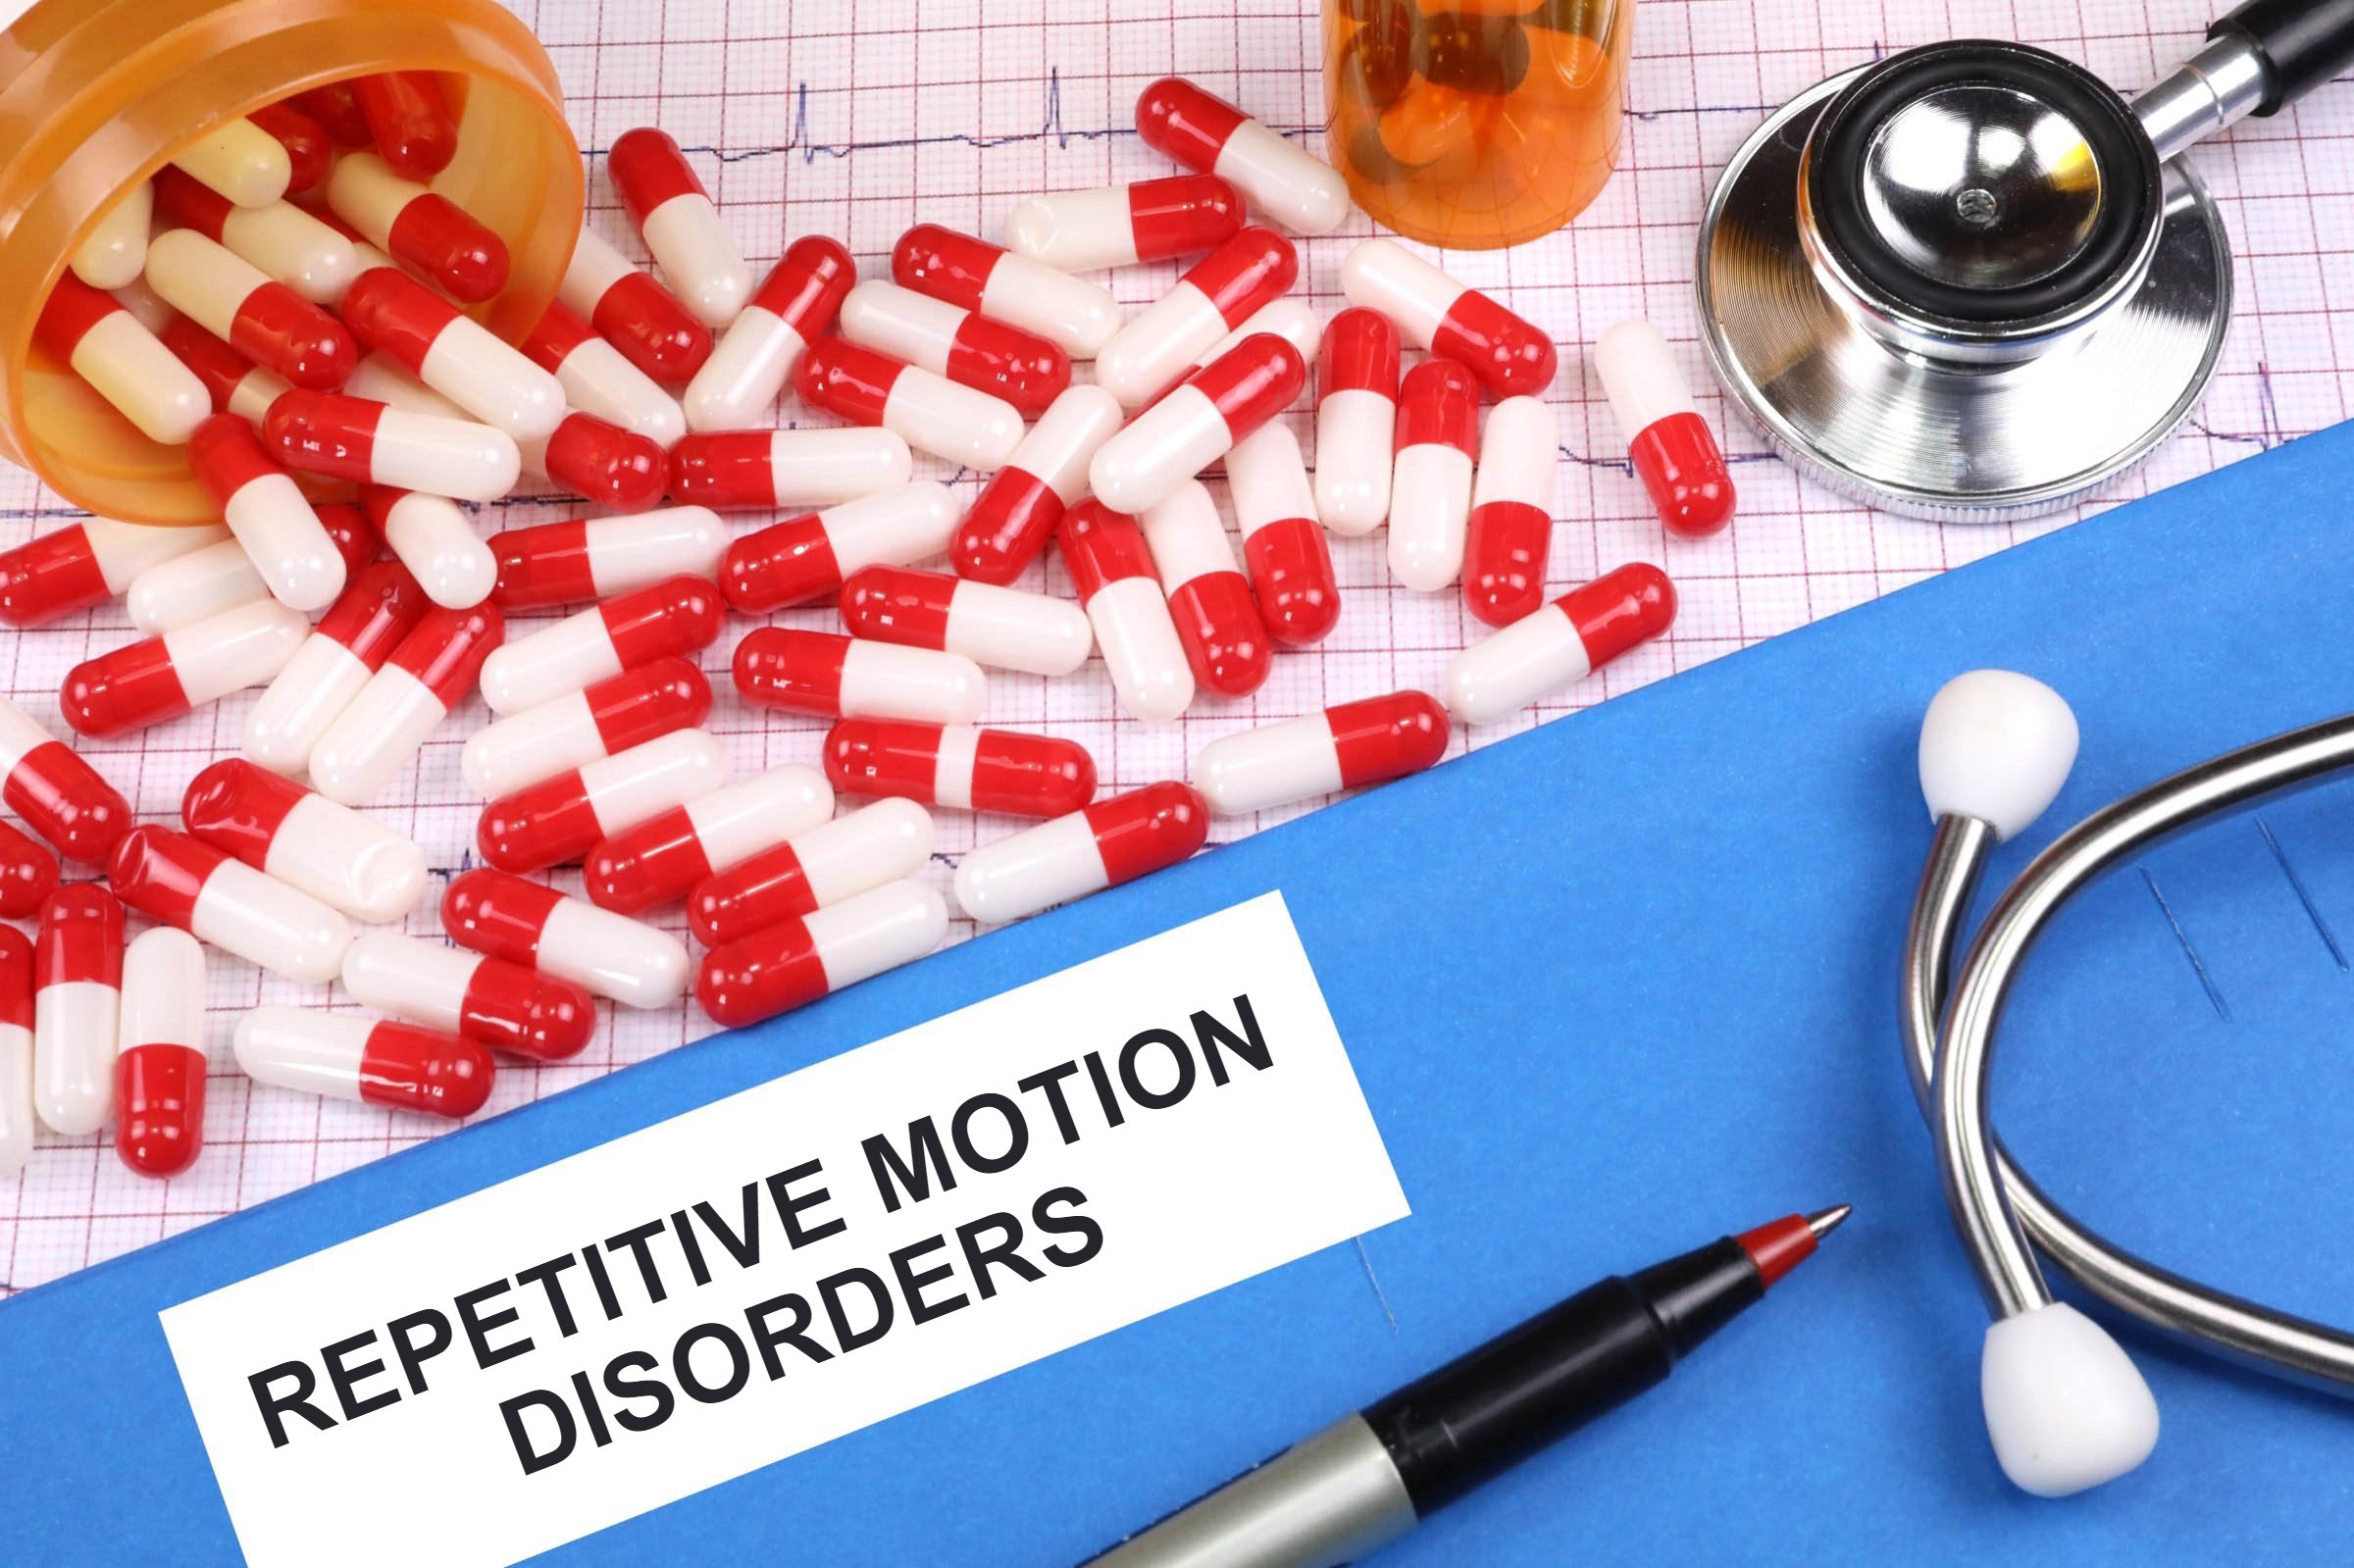 repetitive motion disorders